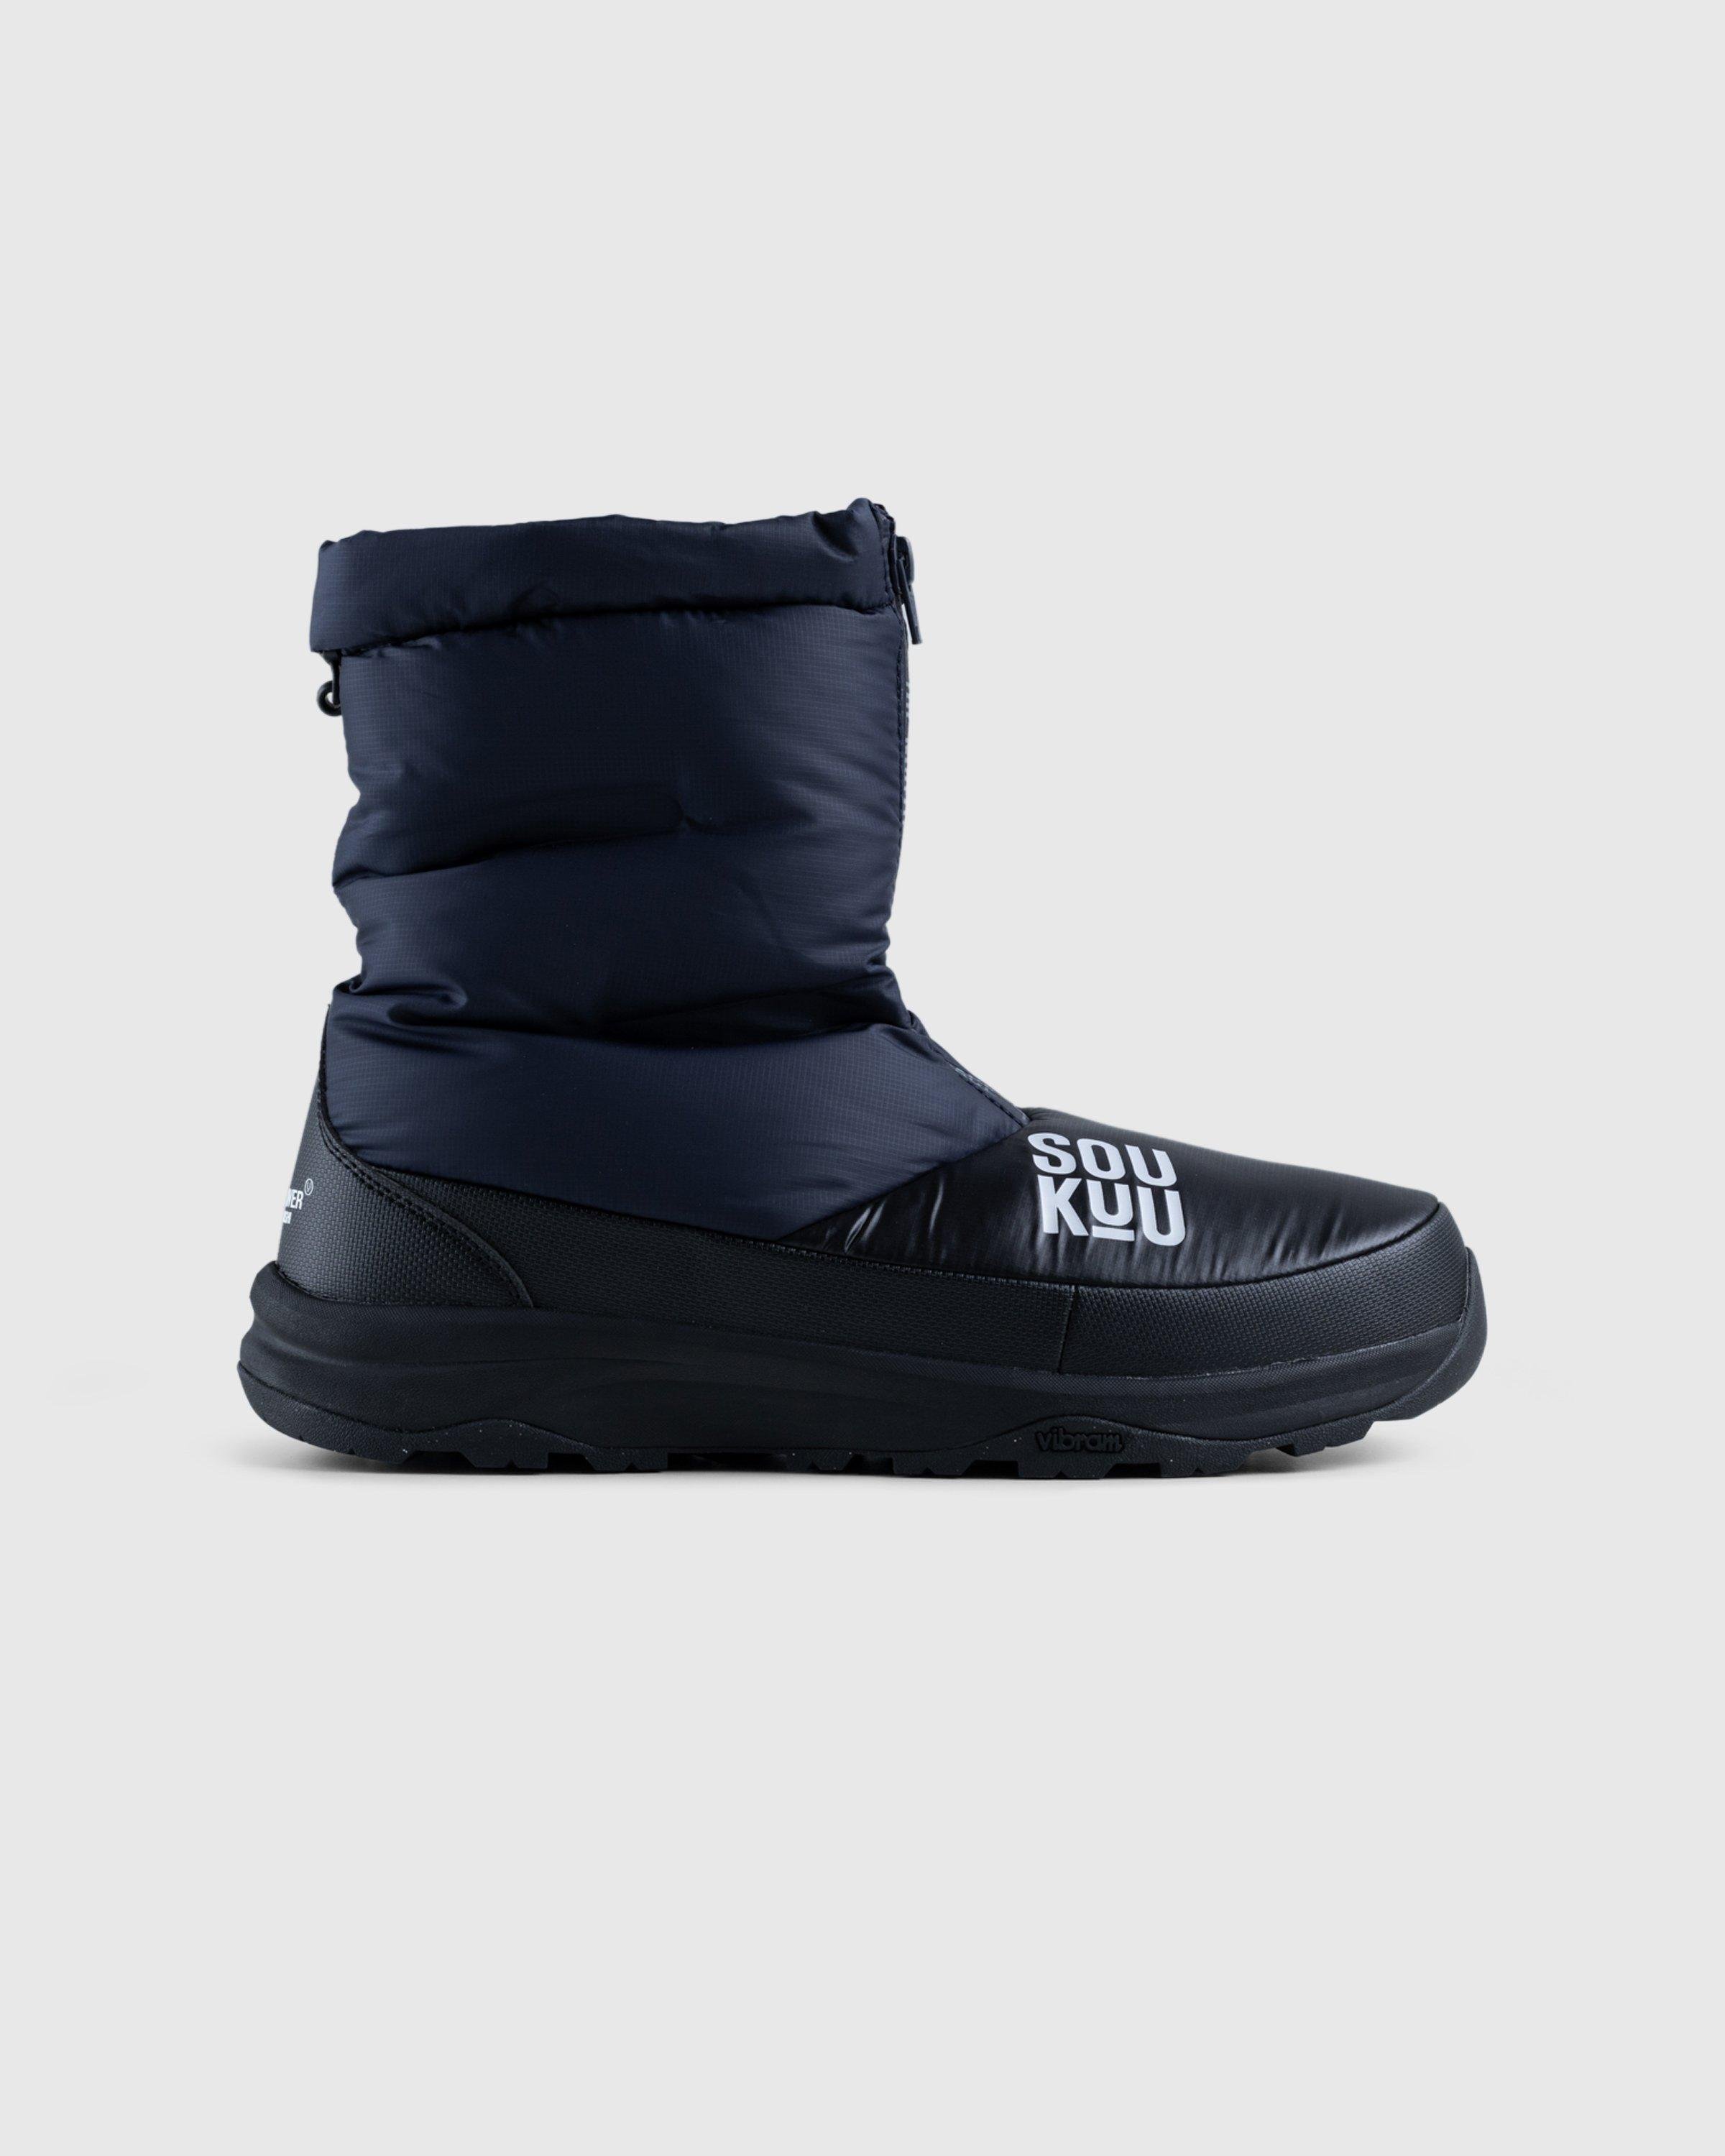 The North Face x UNDERCOVERSoukuu Down Bootie Black/Navy by HIGHSNOBIETY